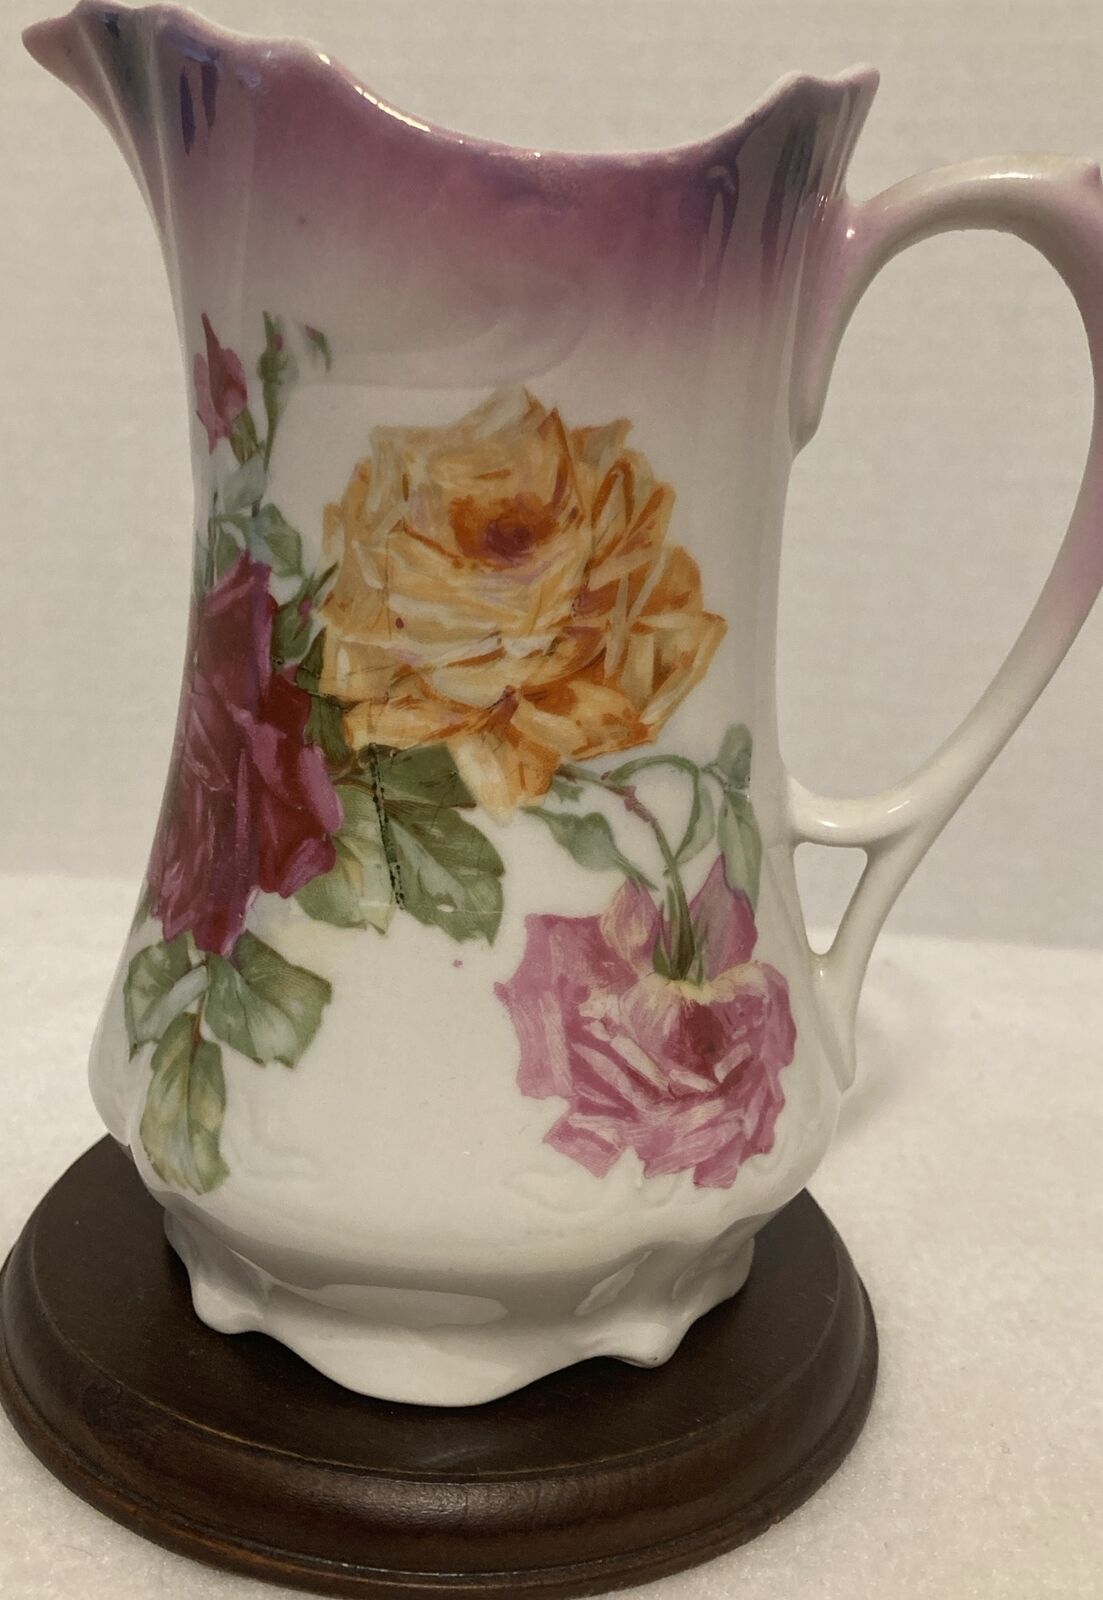 Vintage Porcelain Roses As Design With Overspray At Top Creamer/ Pitcher/Germany